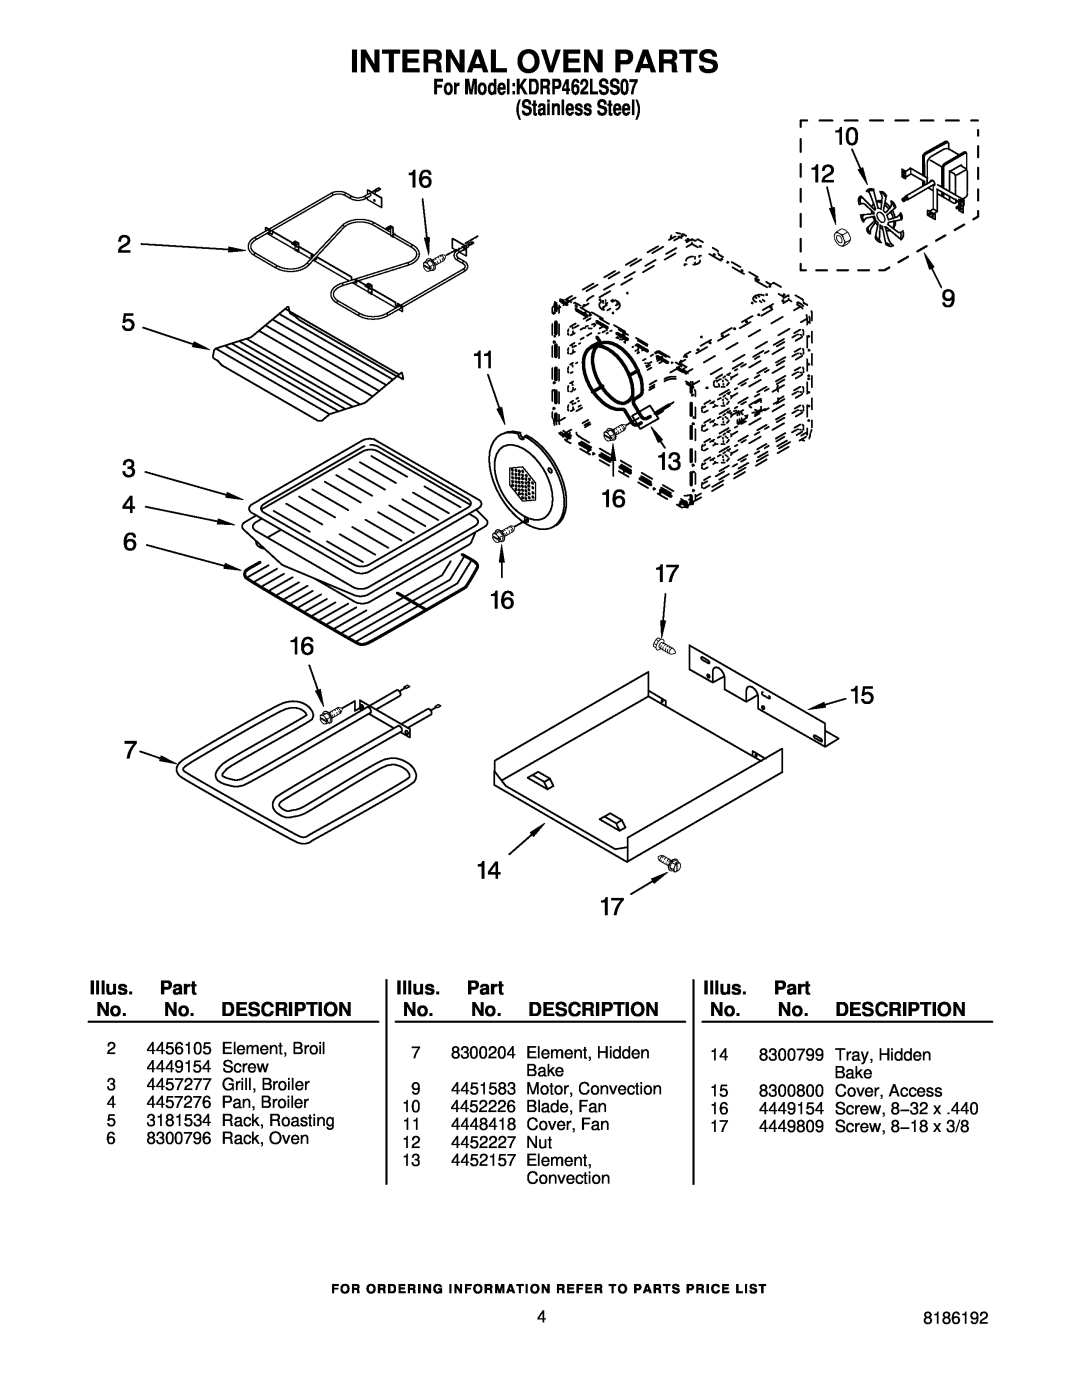 KitchenAid manual Internal Oven Parts, For ModelKDRP462LSS07 Stainless Steel, Illus. Part No. No. DESCRIPTION 